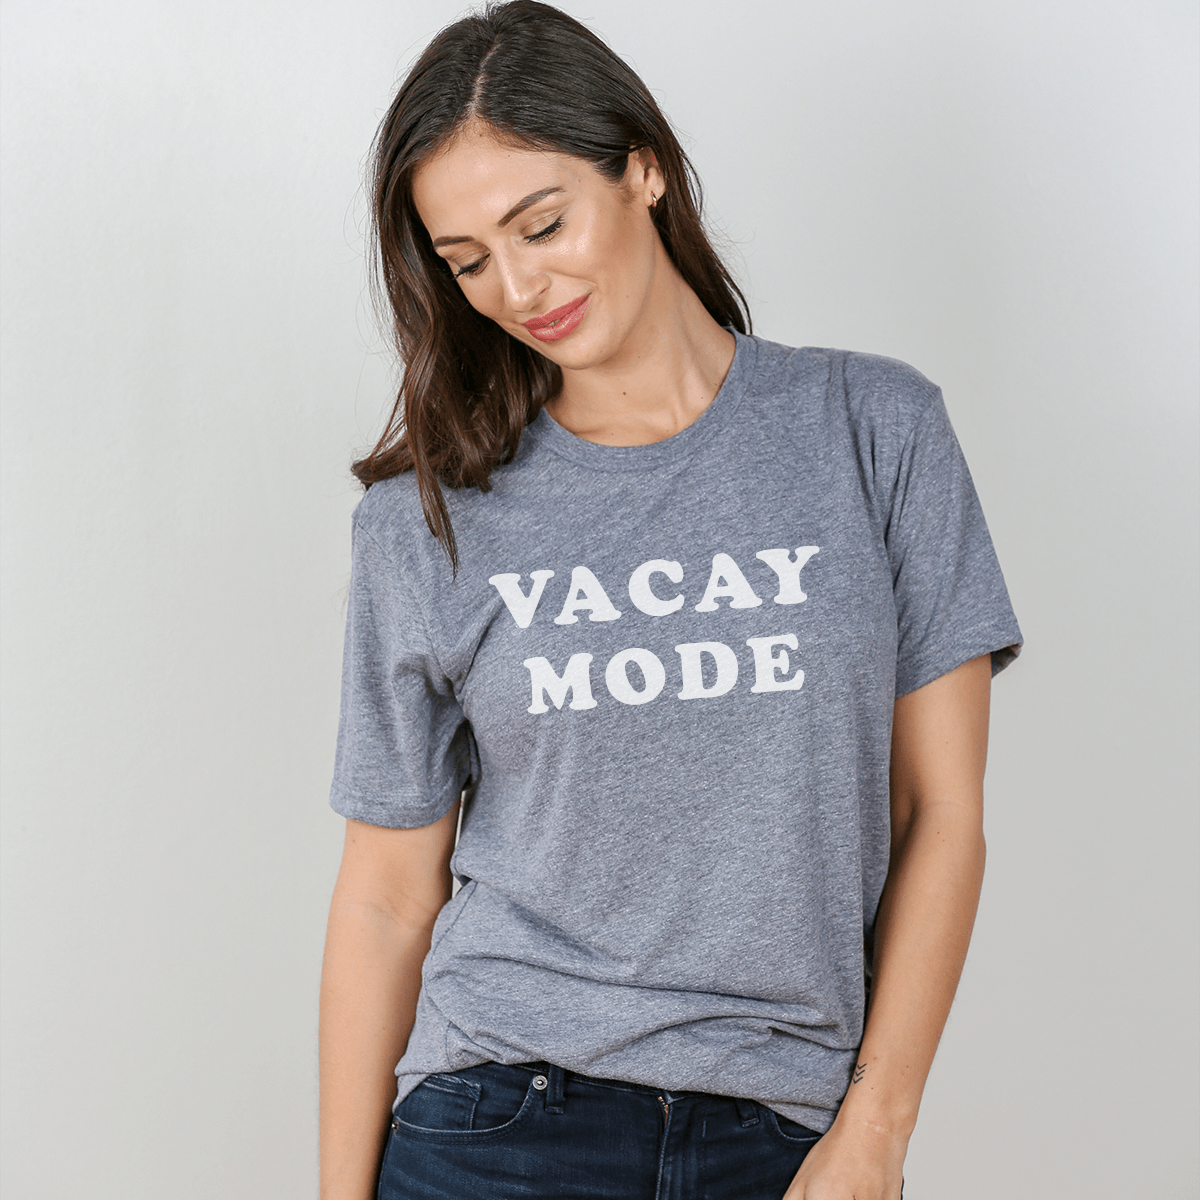 Vacay Mode Shirts The Home T XXL Athletic Grey Crew Neck